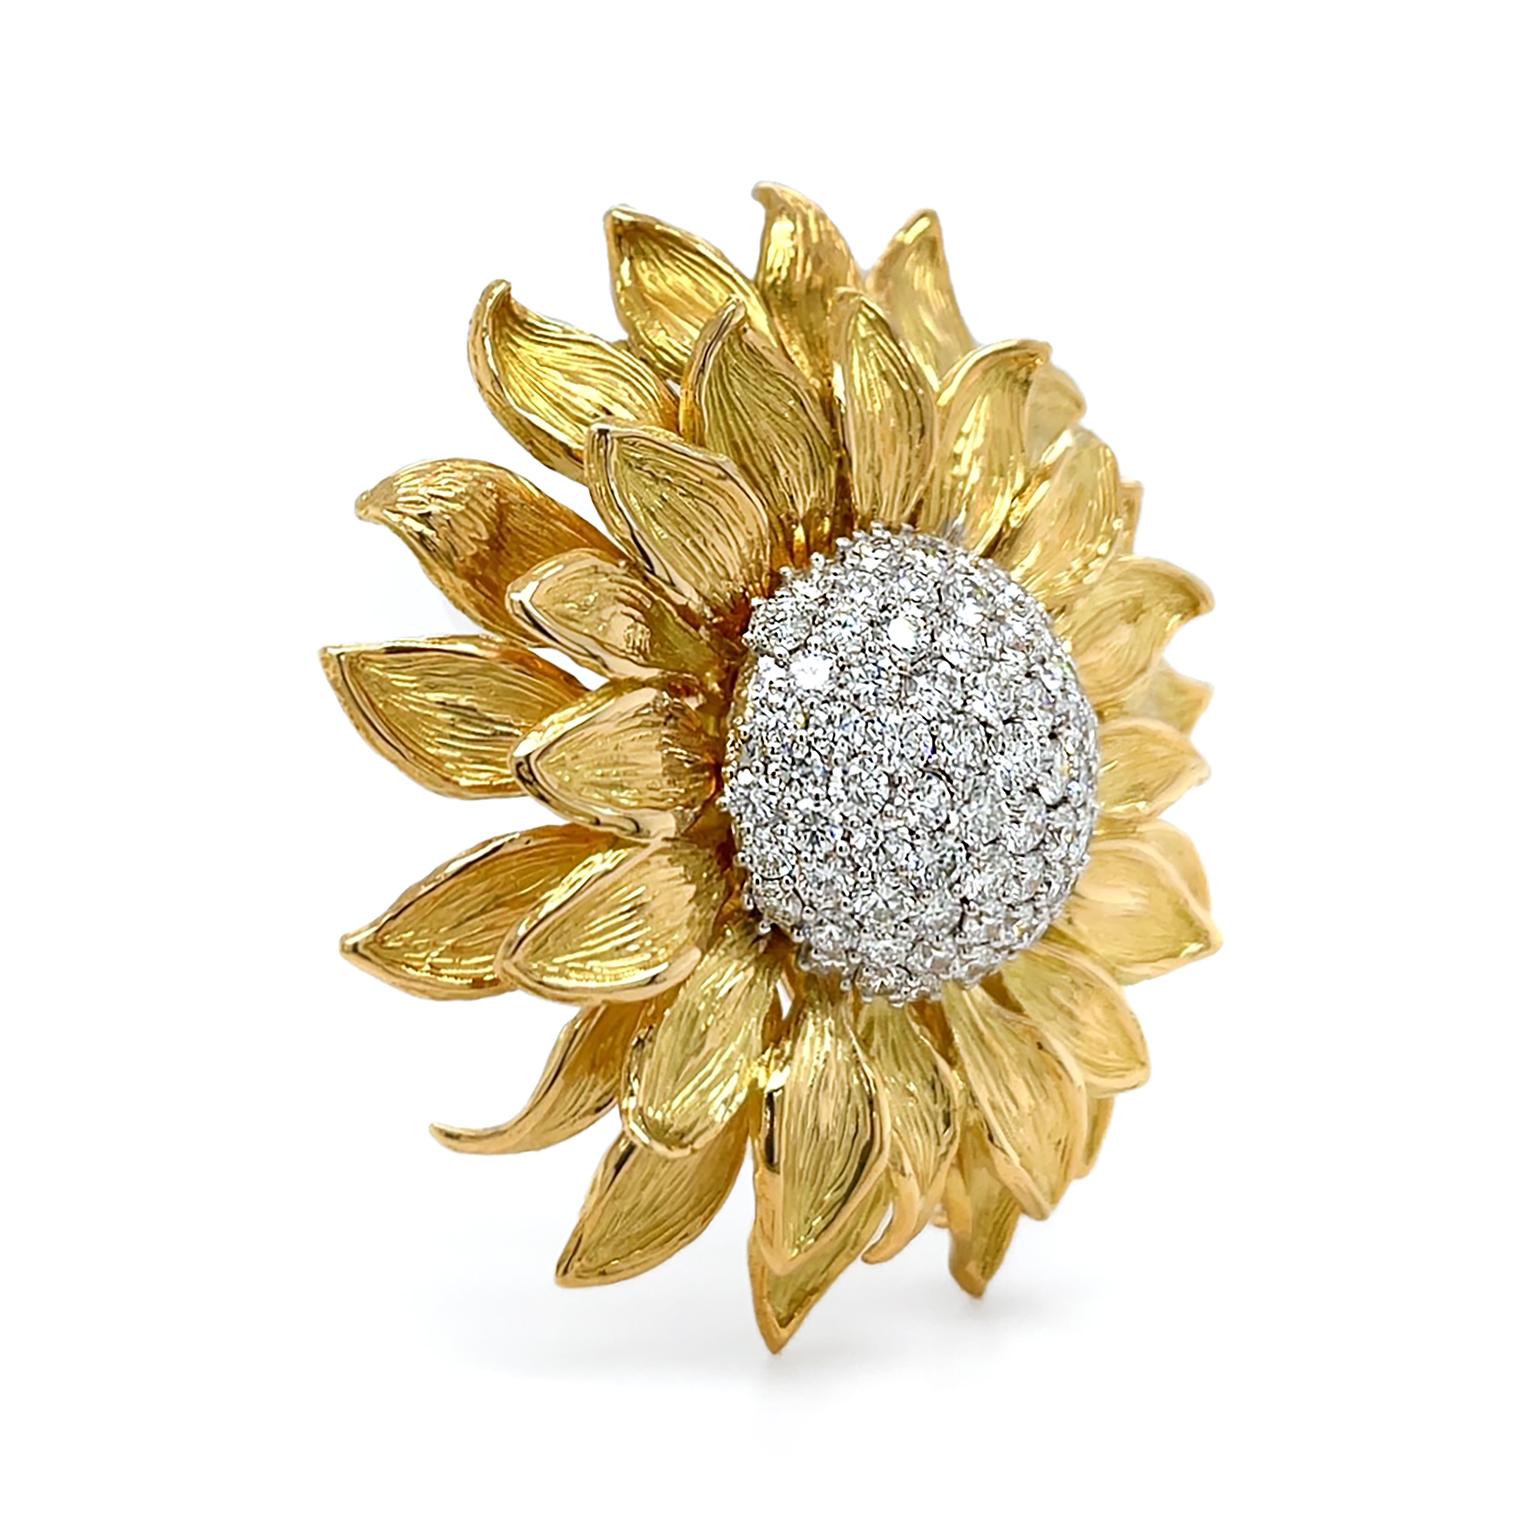 White diamonds and gold combine to produce a brilliant glow to this brooch. 18k yellow gold enlivens a sunflower motif, featuring two overlapping rows of textured petals. The artisanship ensures no two petals are alike by subtle differences in their